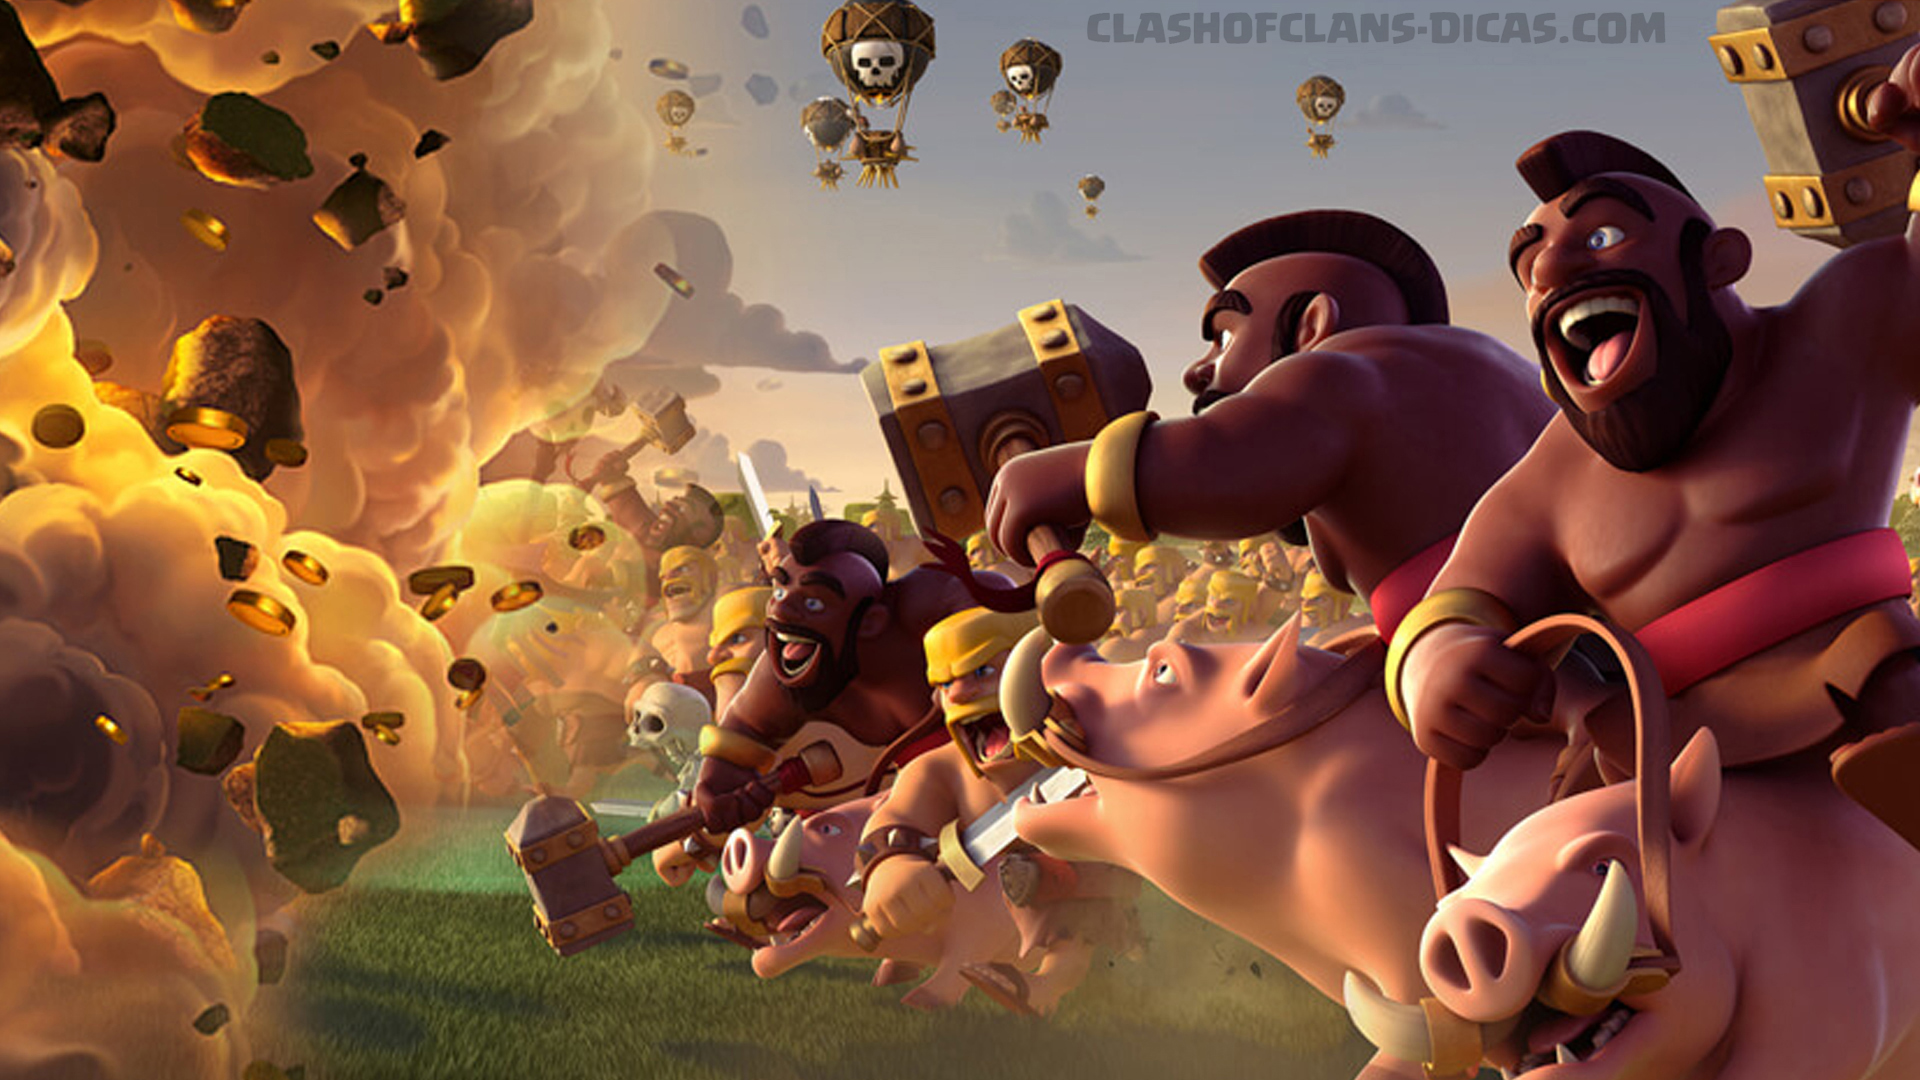 clash of clans wallpaper hd 1080p,action adventure game,strategy video game,animation,adventure game,animated cartoon